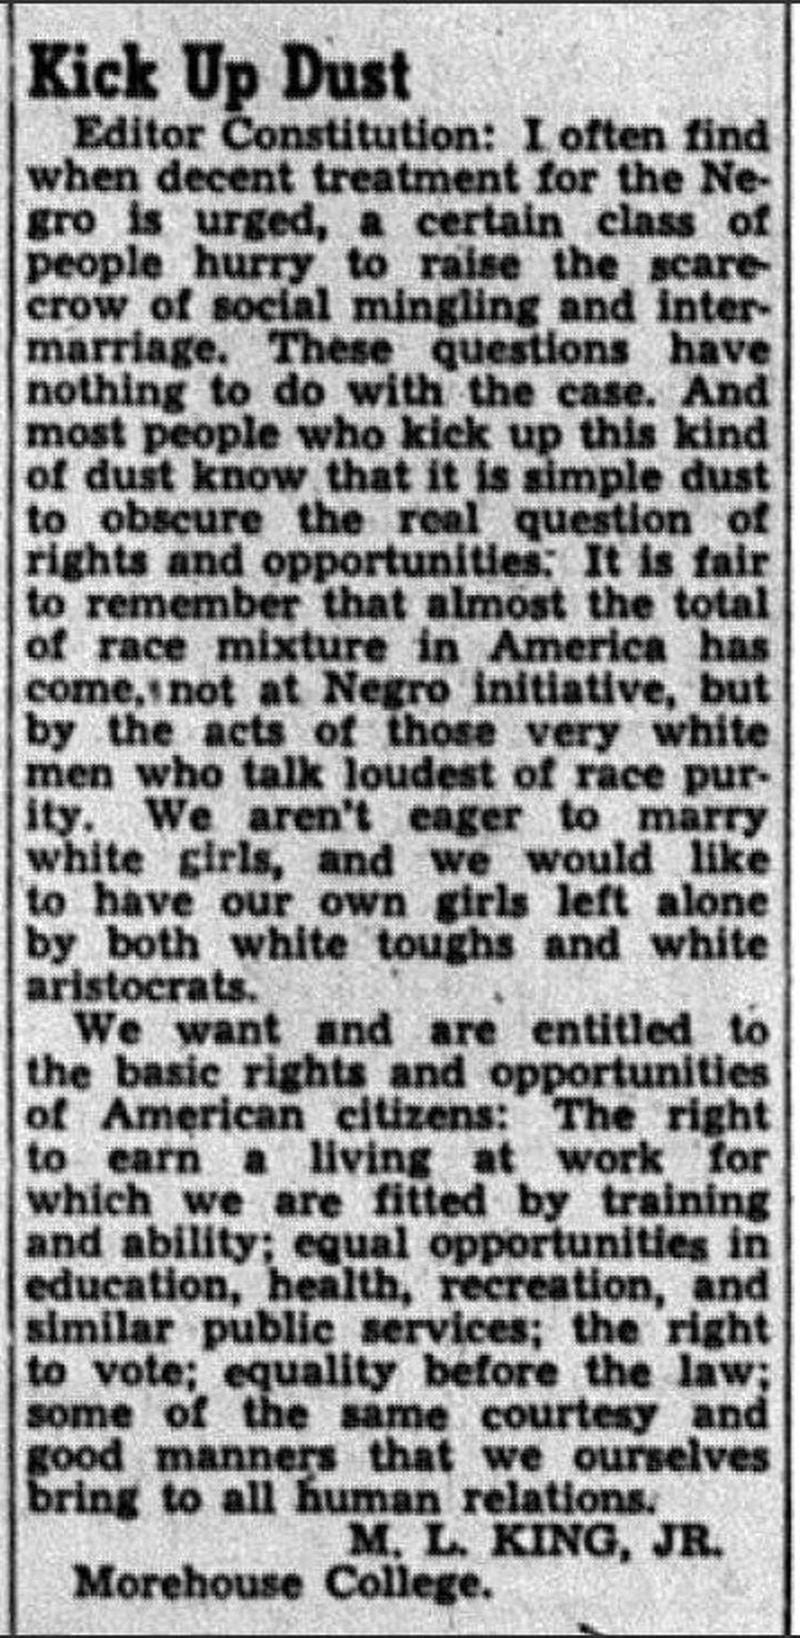 Image of M.L. King Jr.’s letter to The Atlanta Constitution. The newspaper published the letter Aug. 6, 1946.